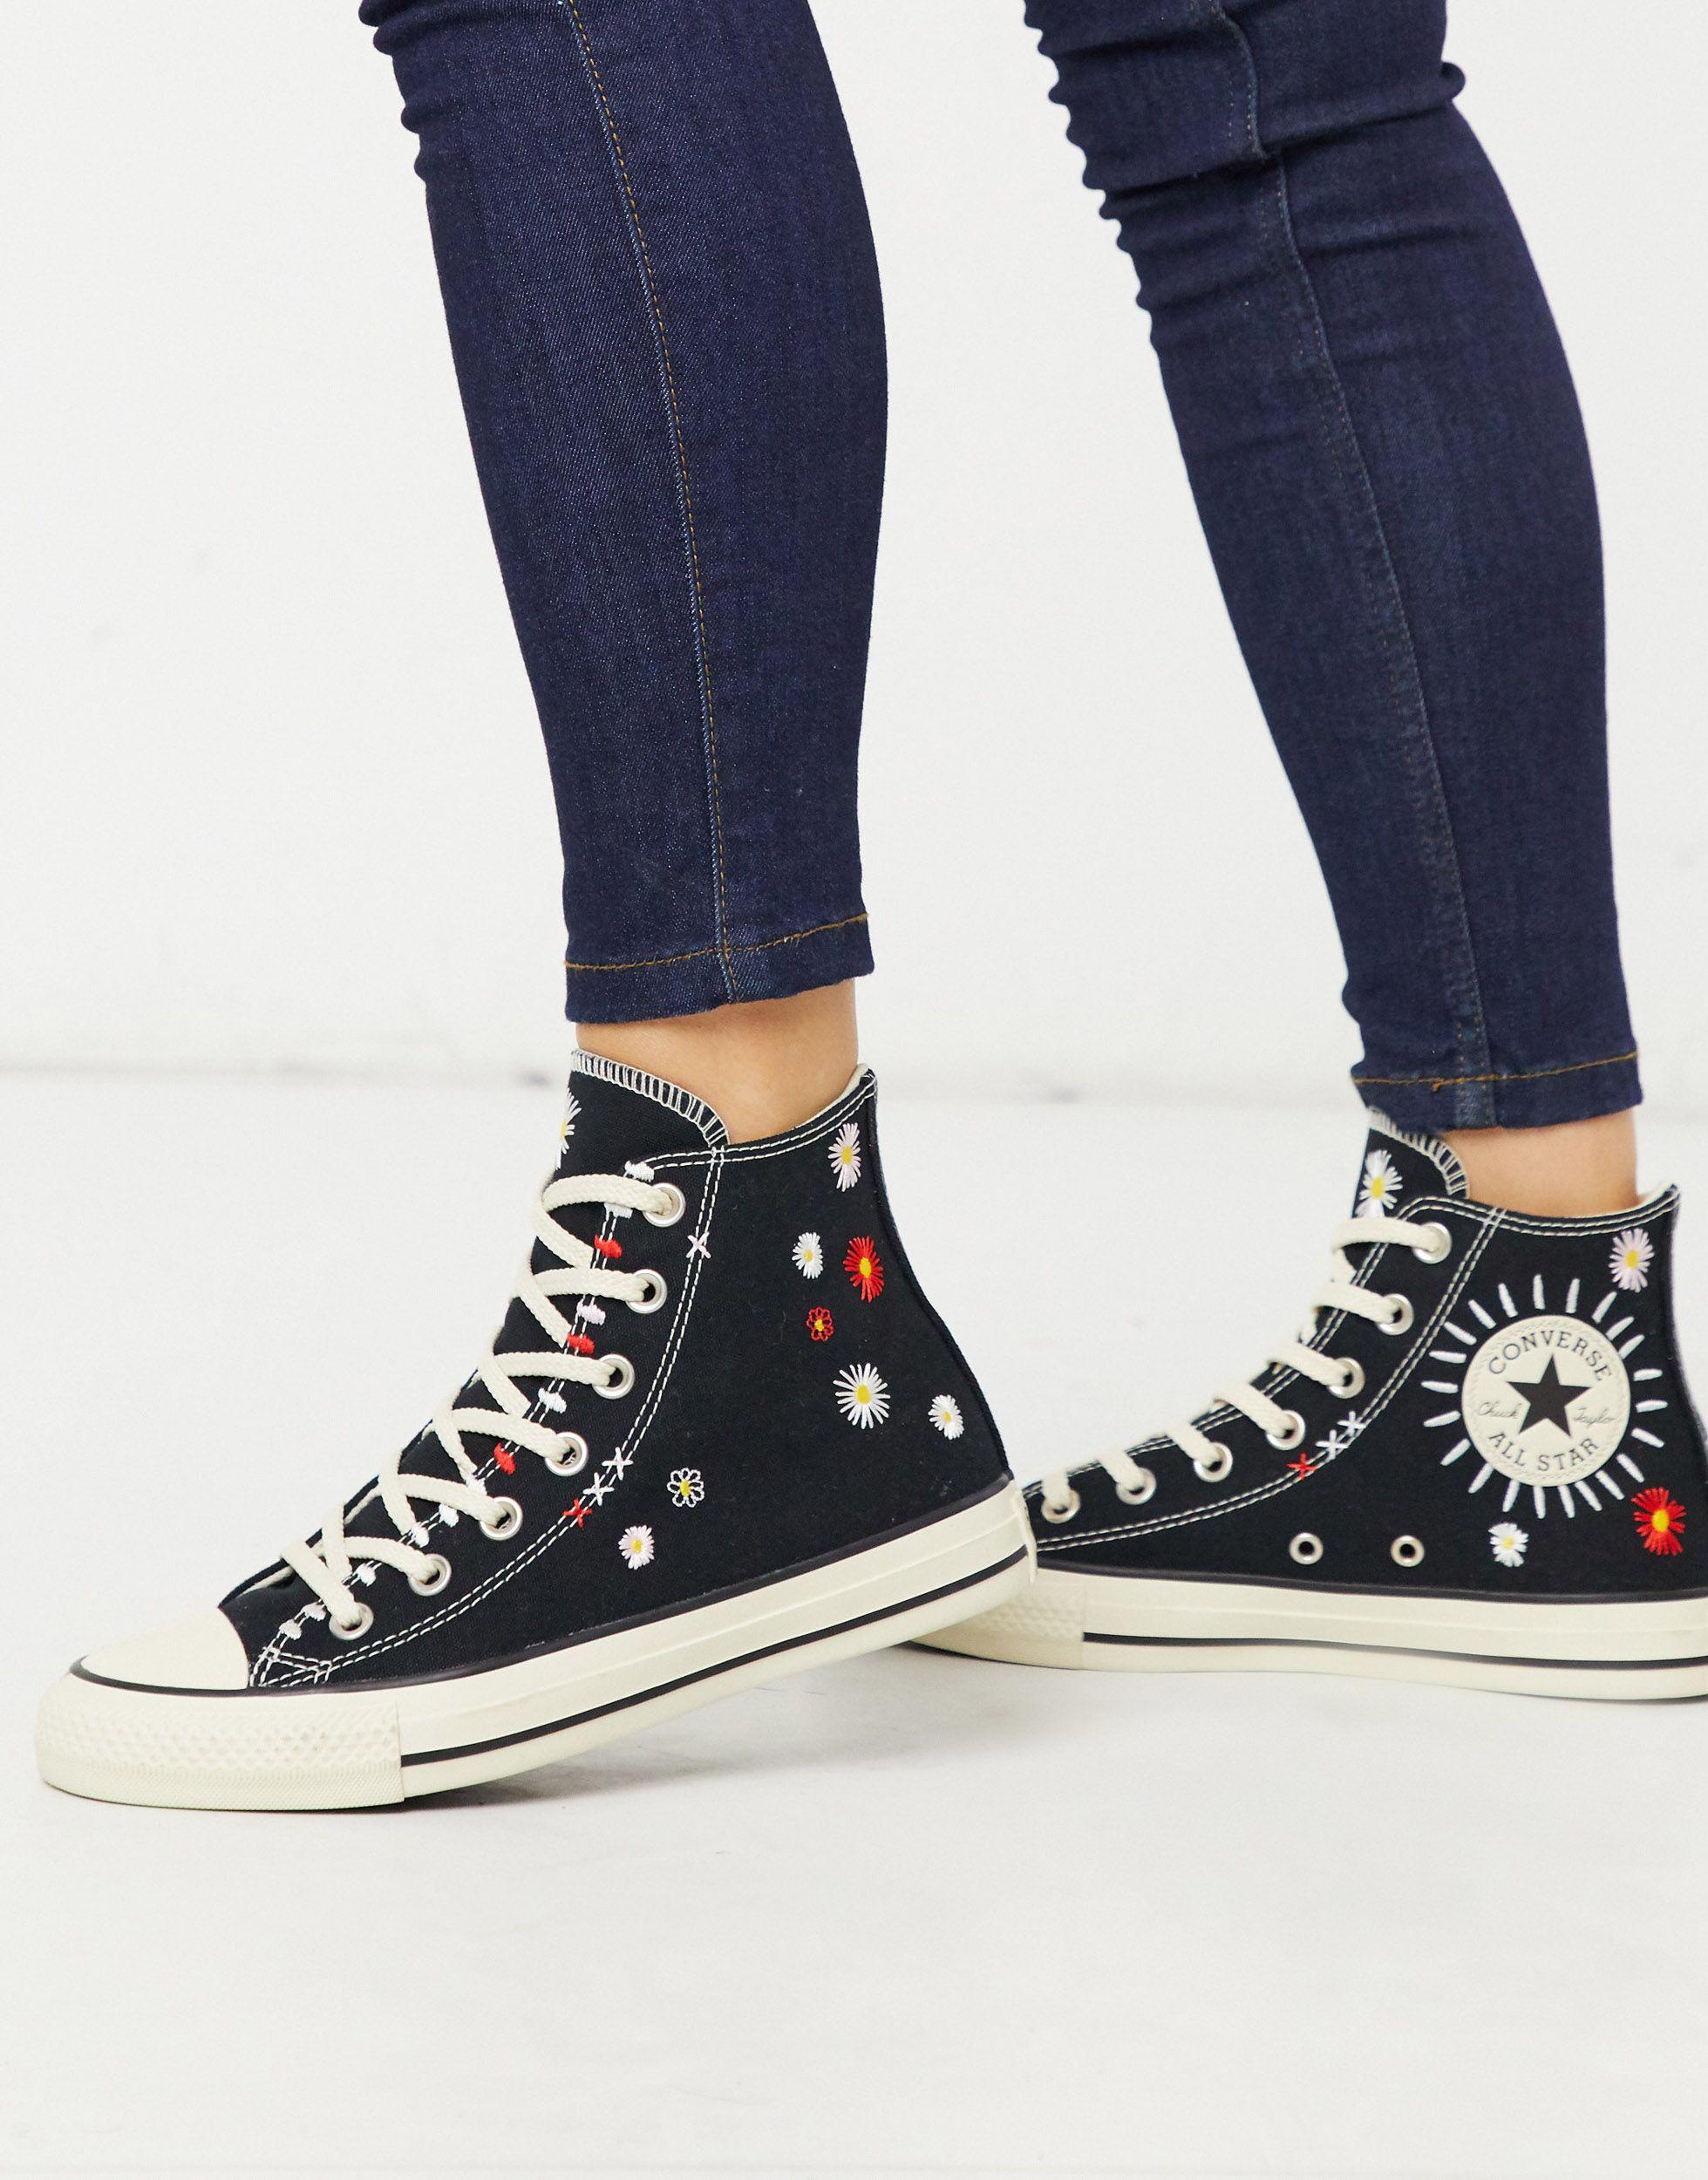 Converse Chuck Taylor All Star Black Embroidered Floral Sneakers | Lyst